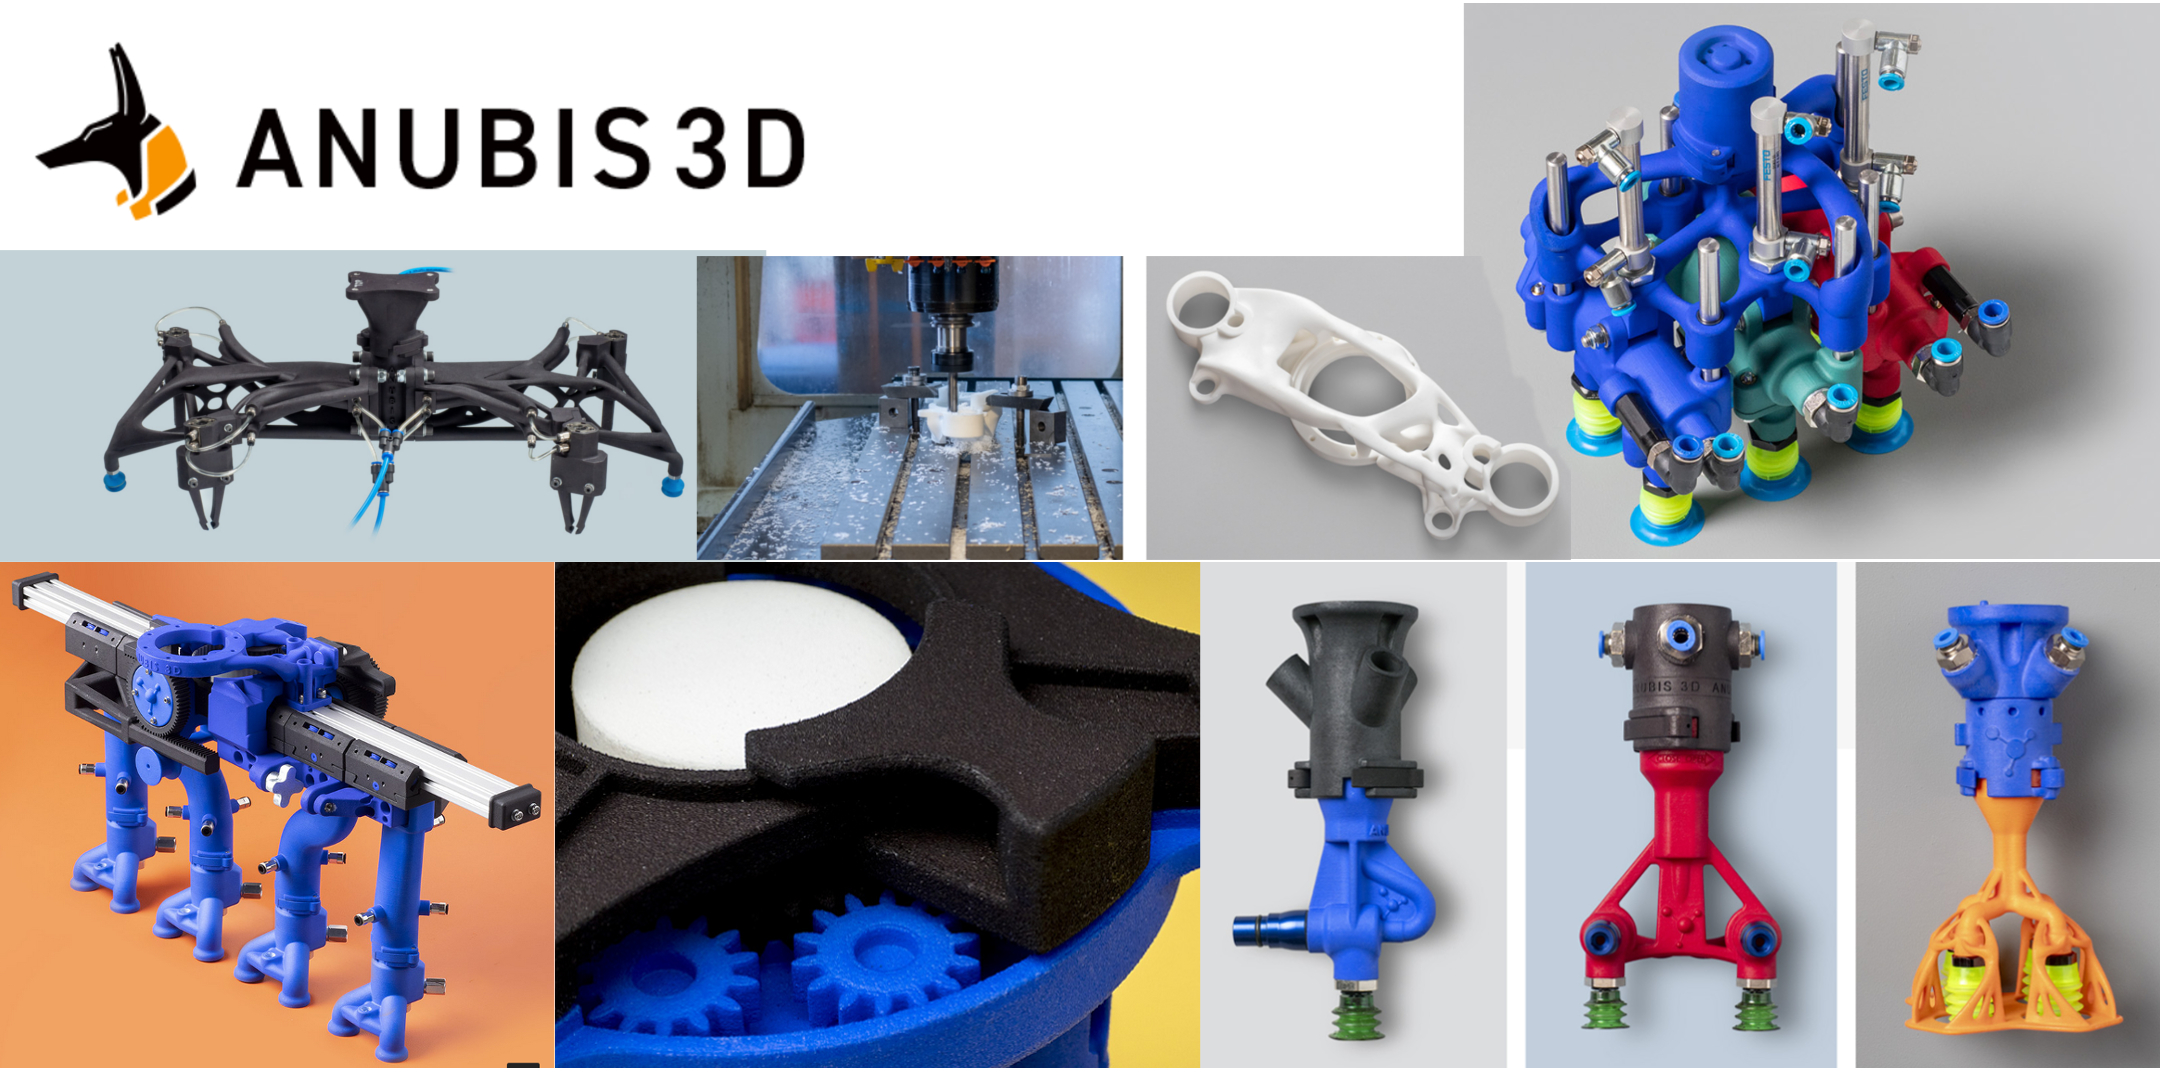 Tour of 'Anubis 3D' - SLS 3D & End-of-Arm Tooling Solutions +++ 528